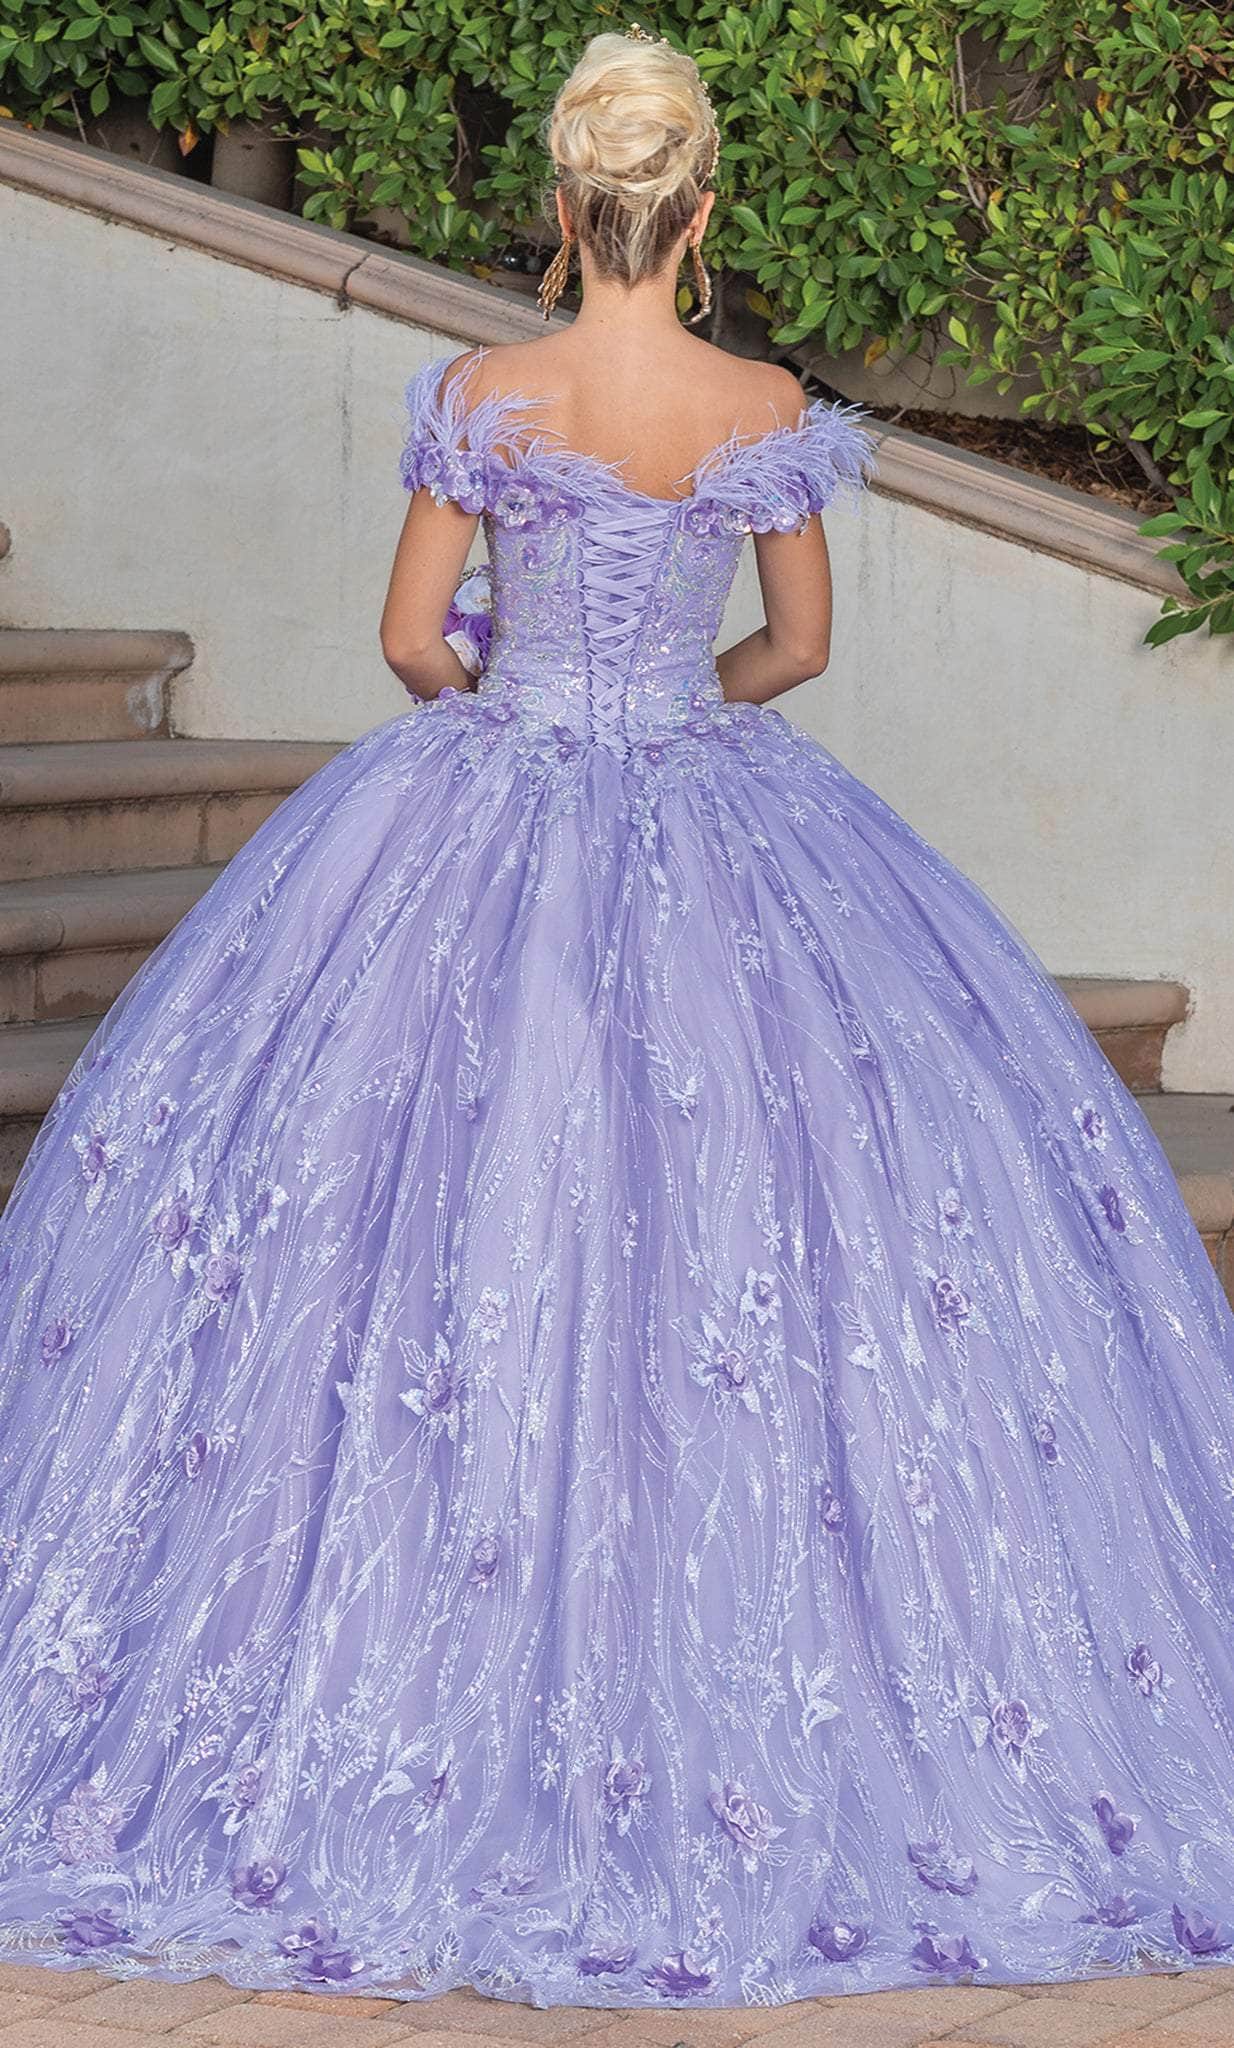 Dancing Queen 1694 - Floral Ornate Quinceanera Ballgown Ball Gowns